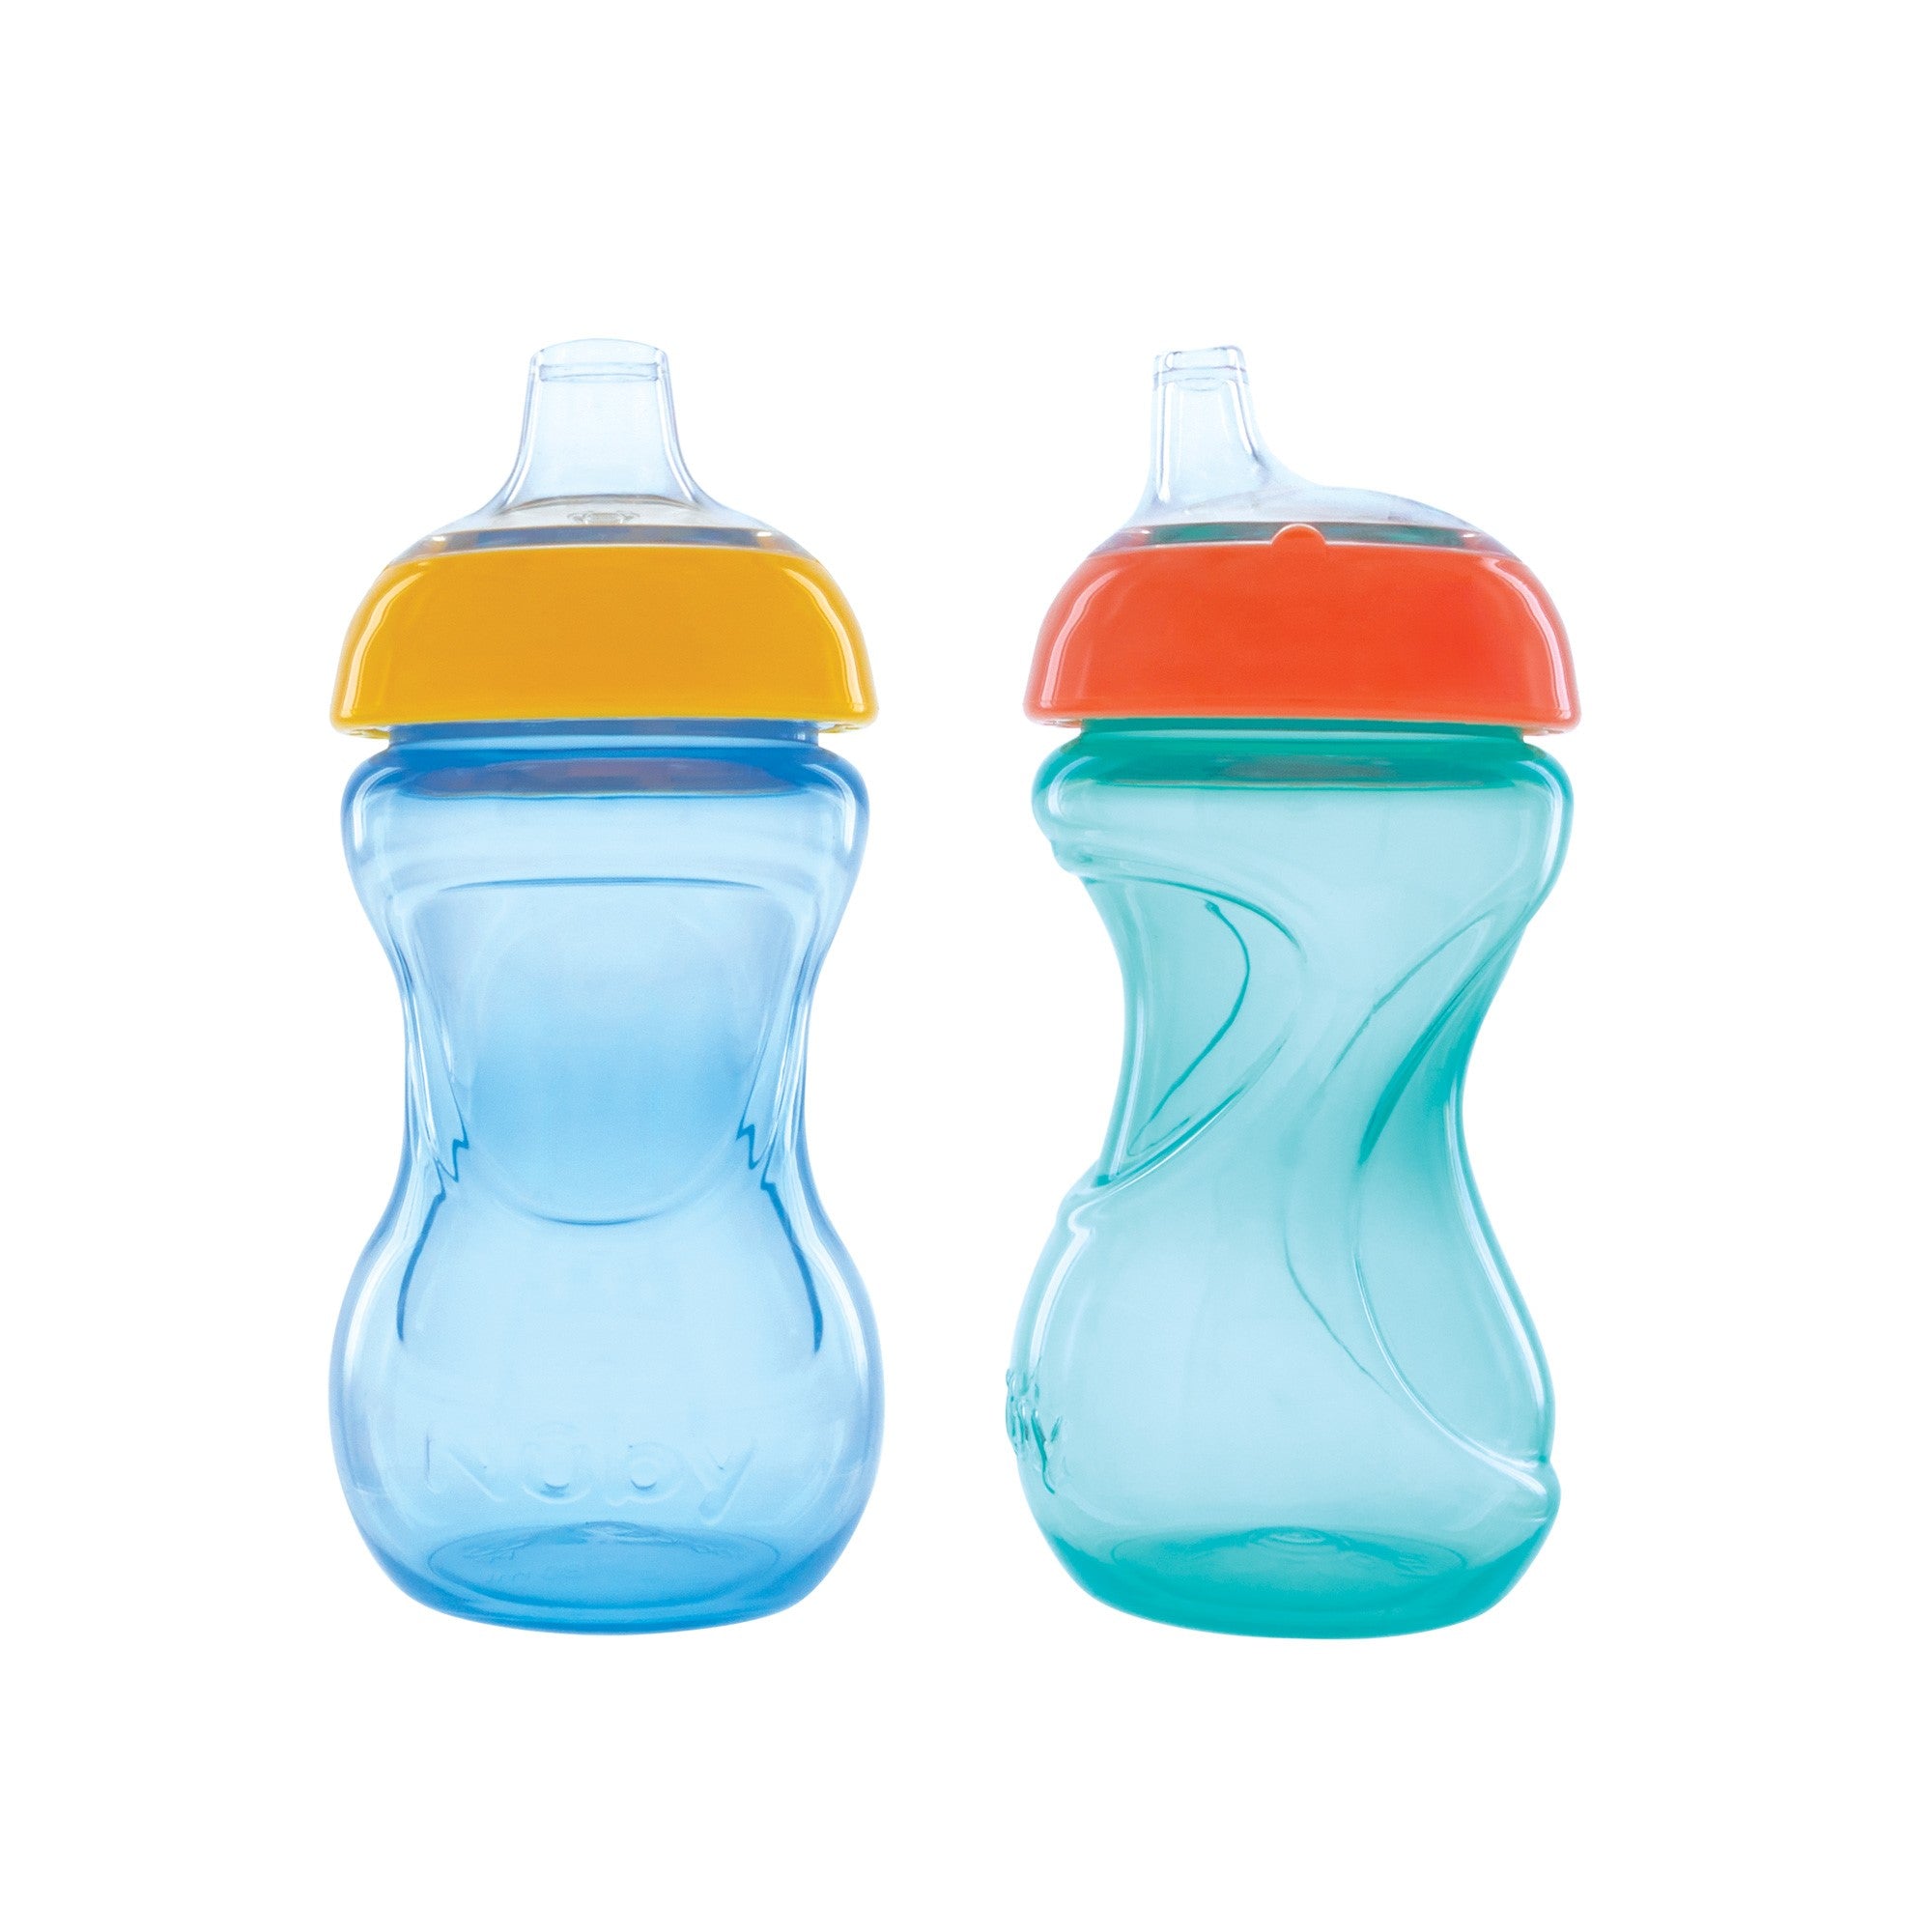 A Leak-Proof Sippy Cup That Keeps Drinks Cool {Review + Giveaway} - Mommy's  Bundle